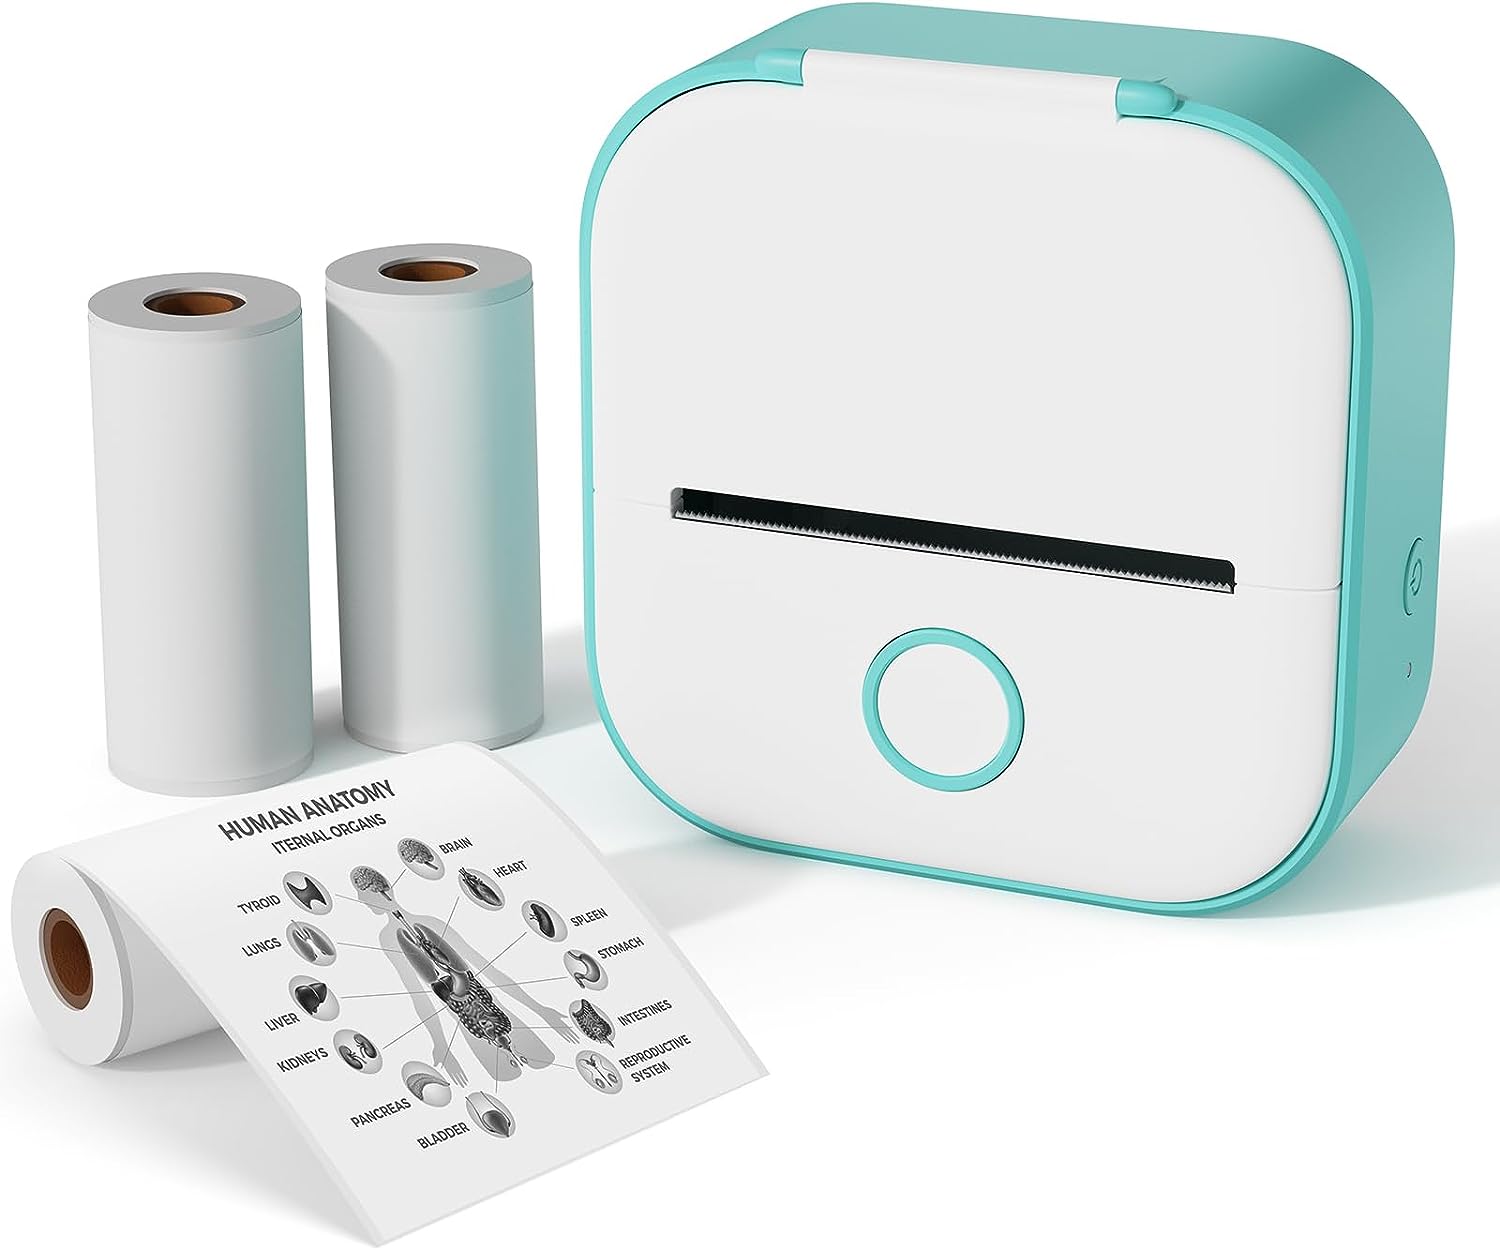 Phomemo Mini Sticker Printer with 3 Rolls Paper T02 Mini Portable Thermal  Printer,Sticker Maker Machine for Study, Brithday Gift, Journal, Work,  Children DIY, Compatible with Phone & Tablet, Green